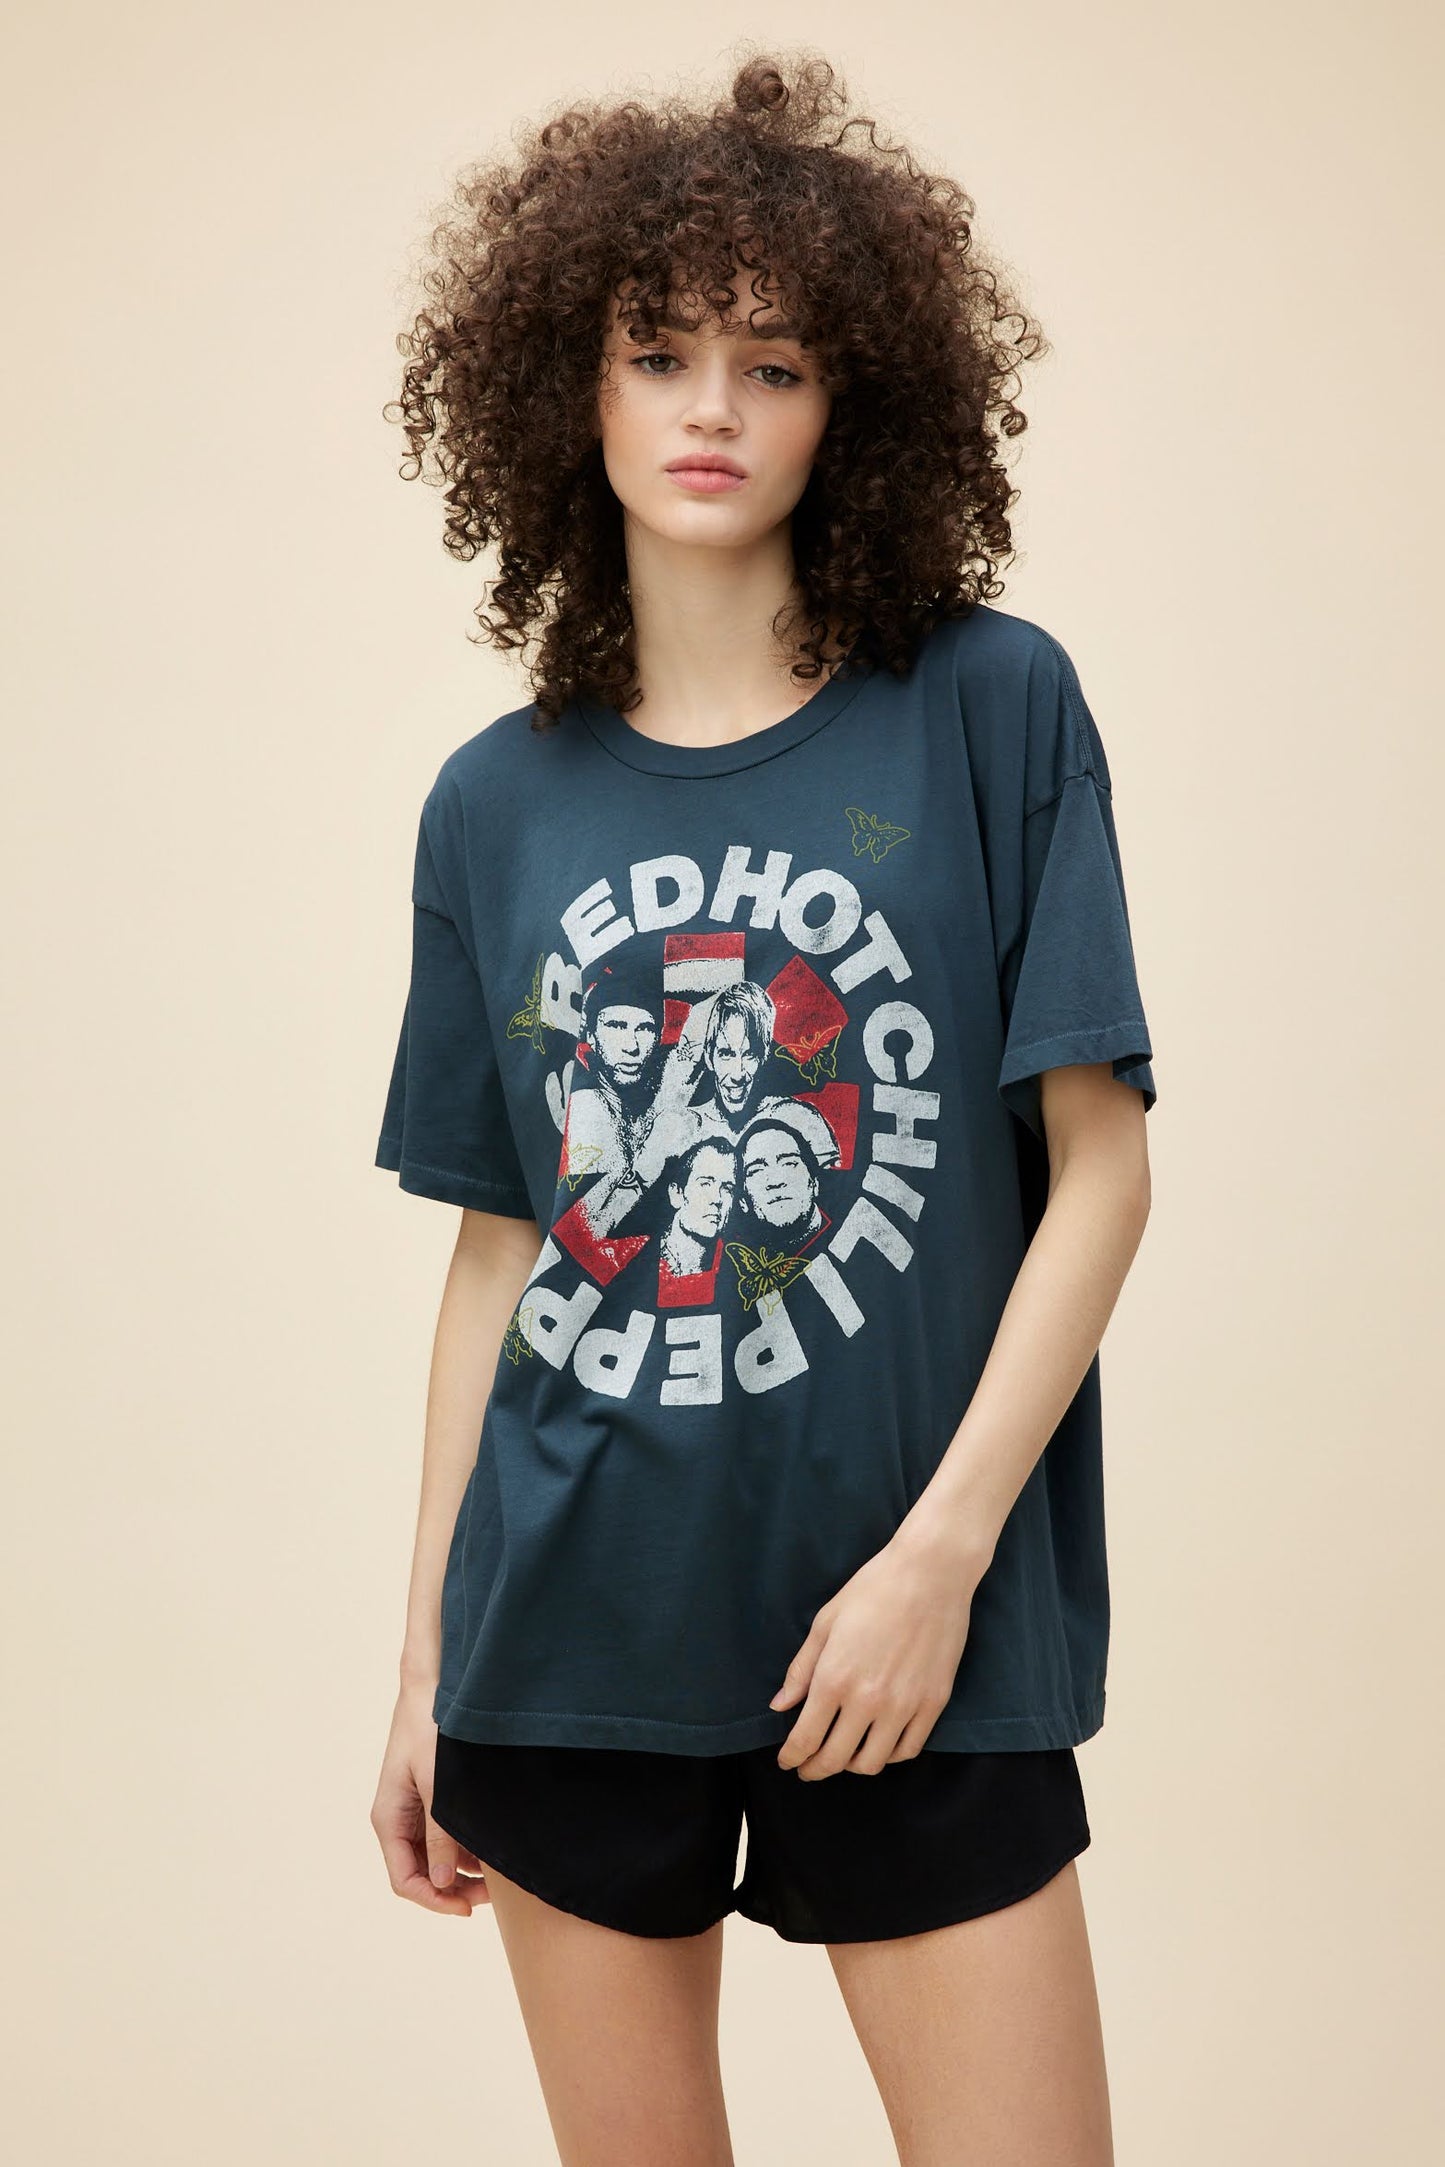 Curly-haired model wearing an oversized Red Hot Chili Peppers graphic tee.